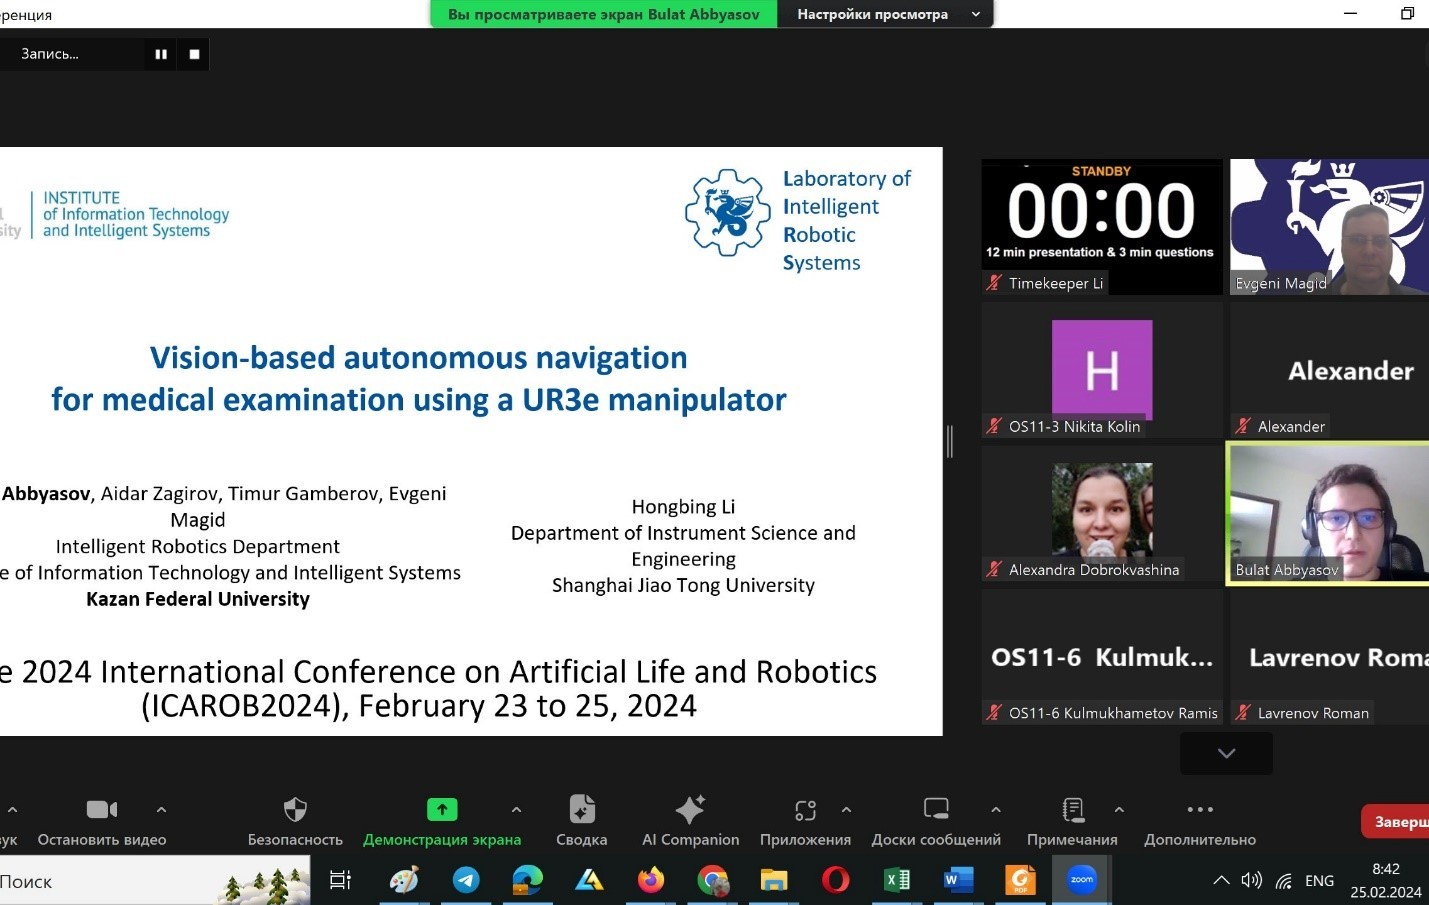 Laboratory of Intelligent Robotics Systems presented the results of scientific work at the International conference on artificial life and robotics